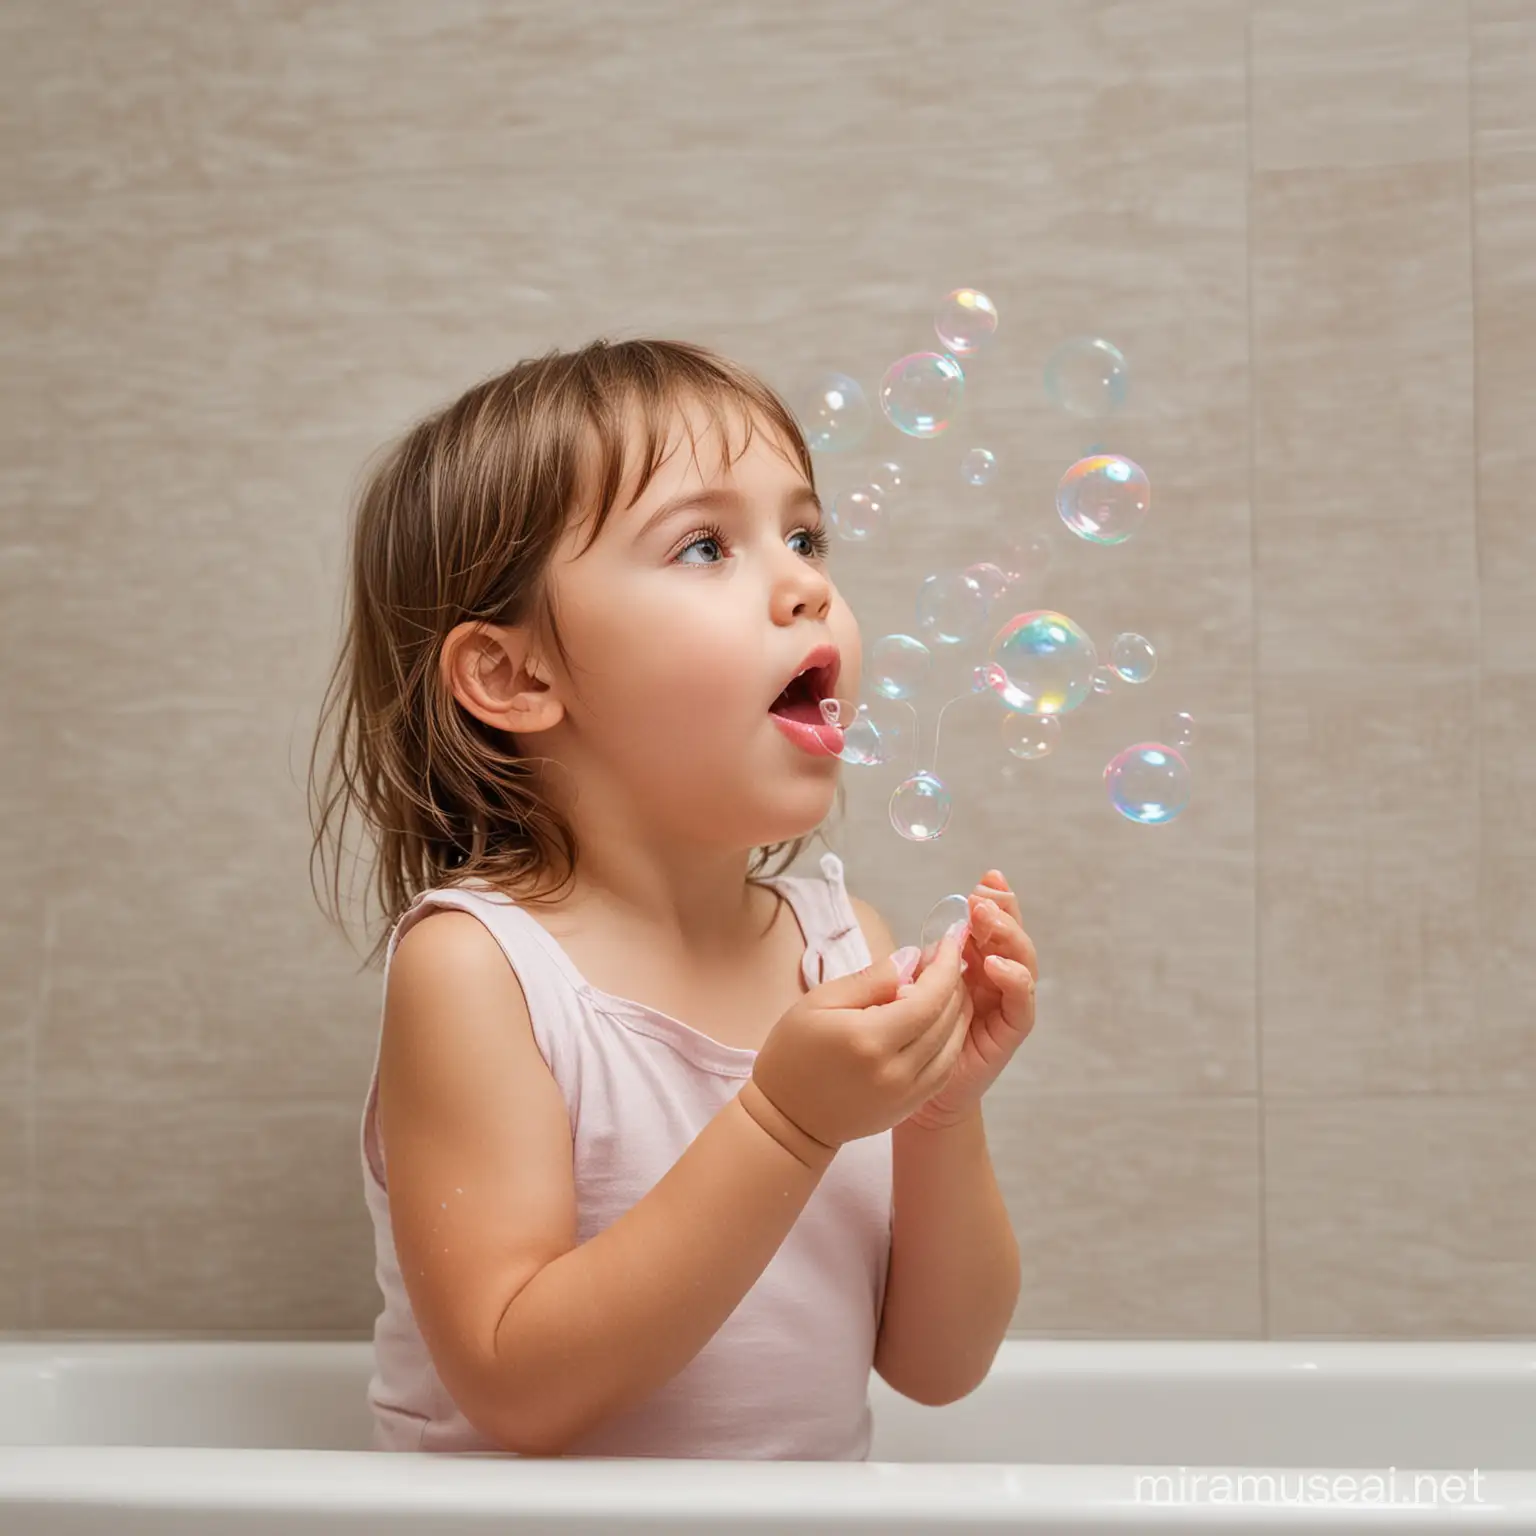 Child Blowing Soap Bubbles in Bathroom